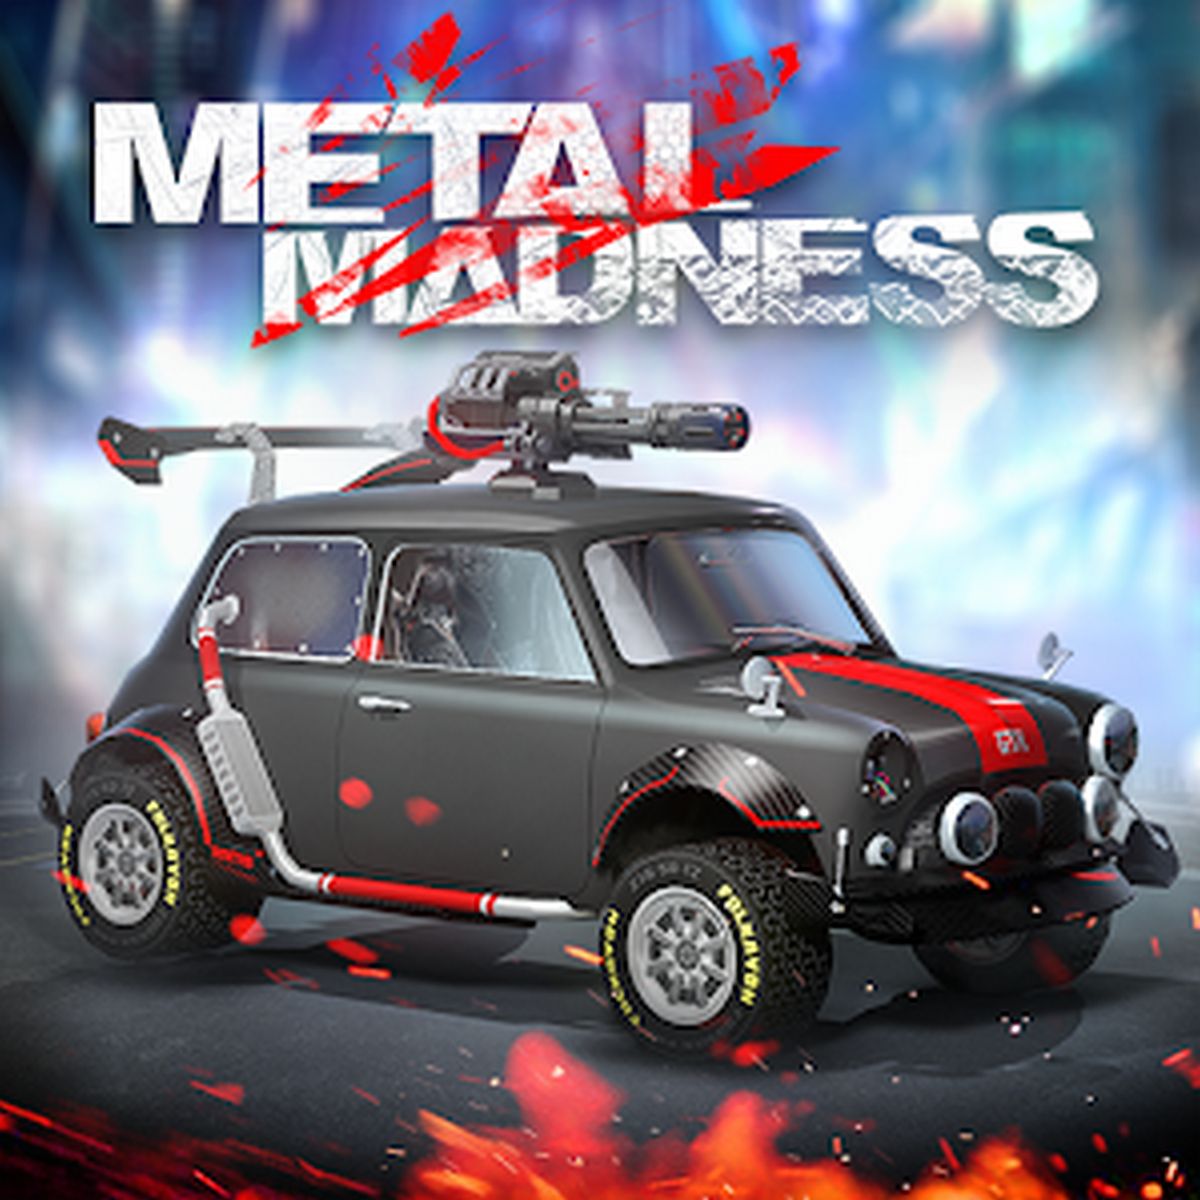 Metal Madness: PvP Shooter